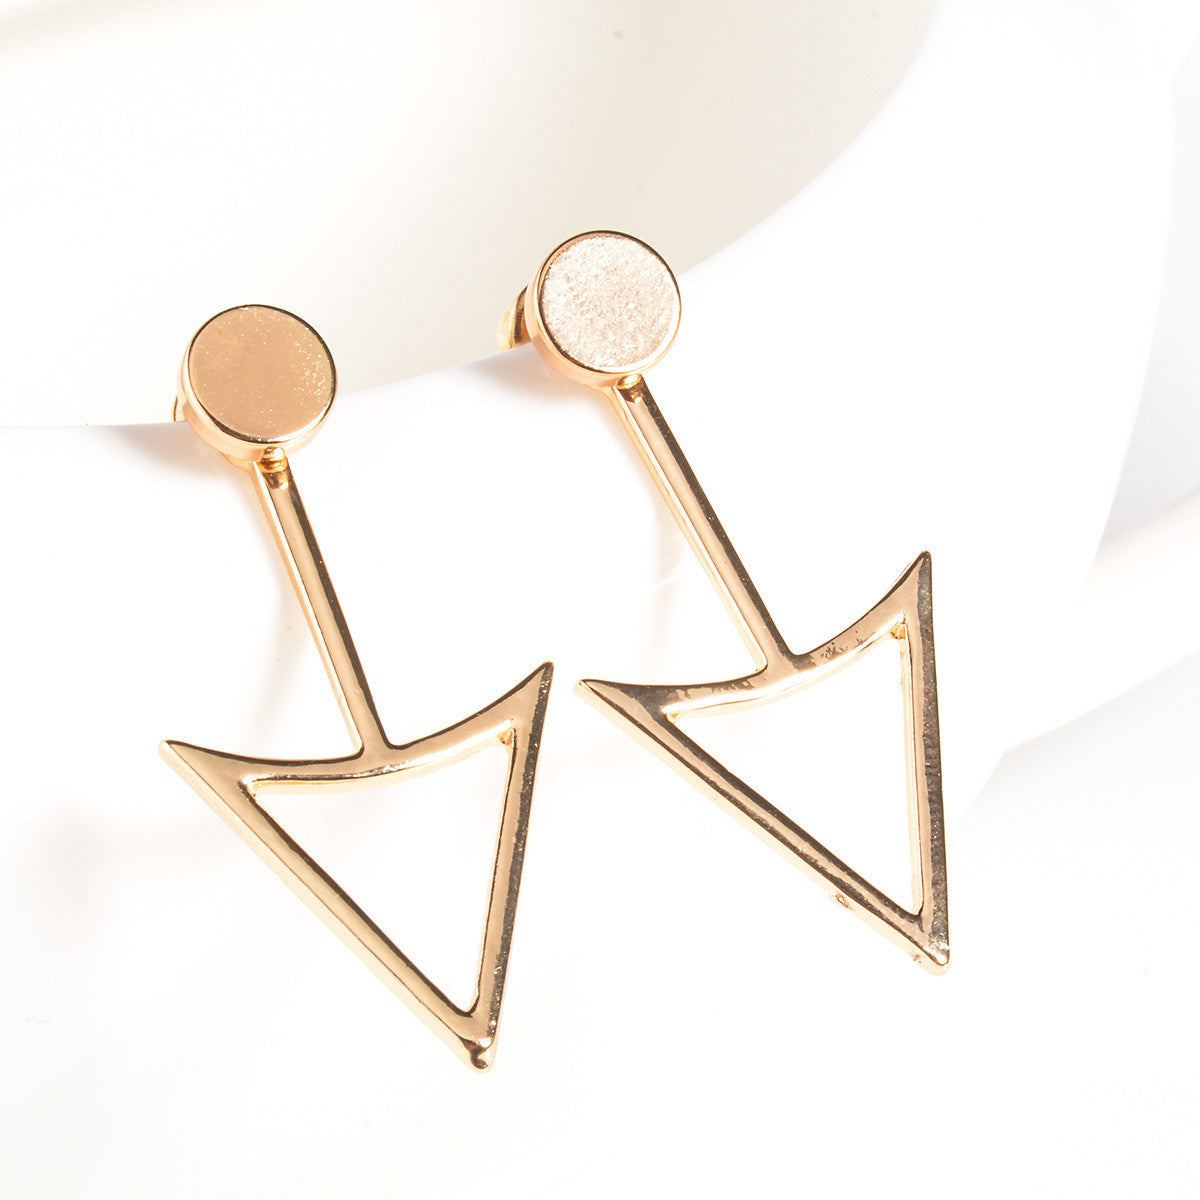 Unique Triangle Women's Earrings - Oh Yours Fashion - 2